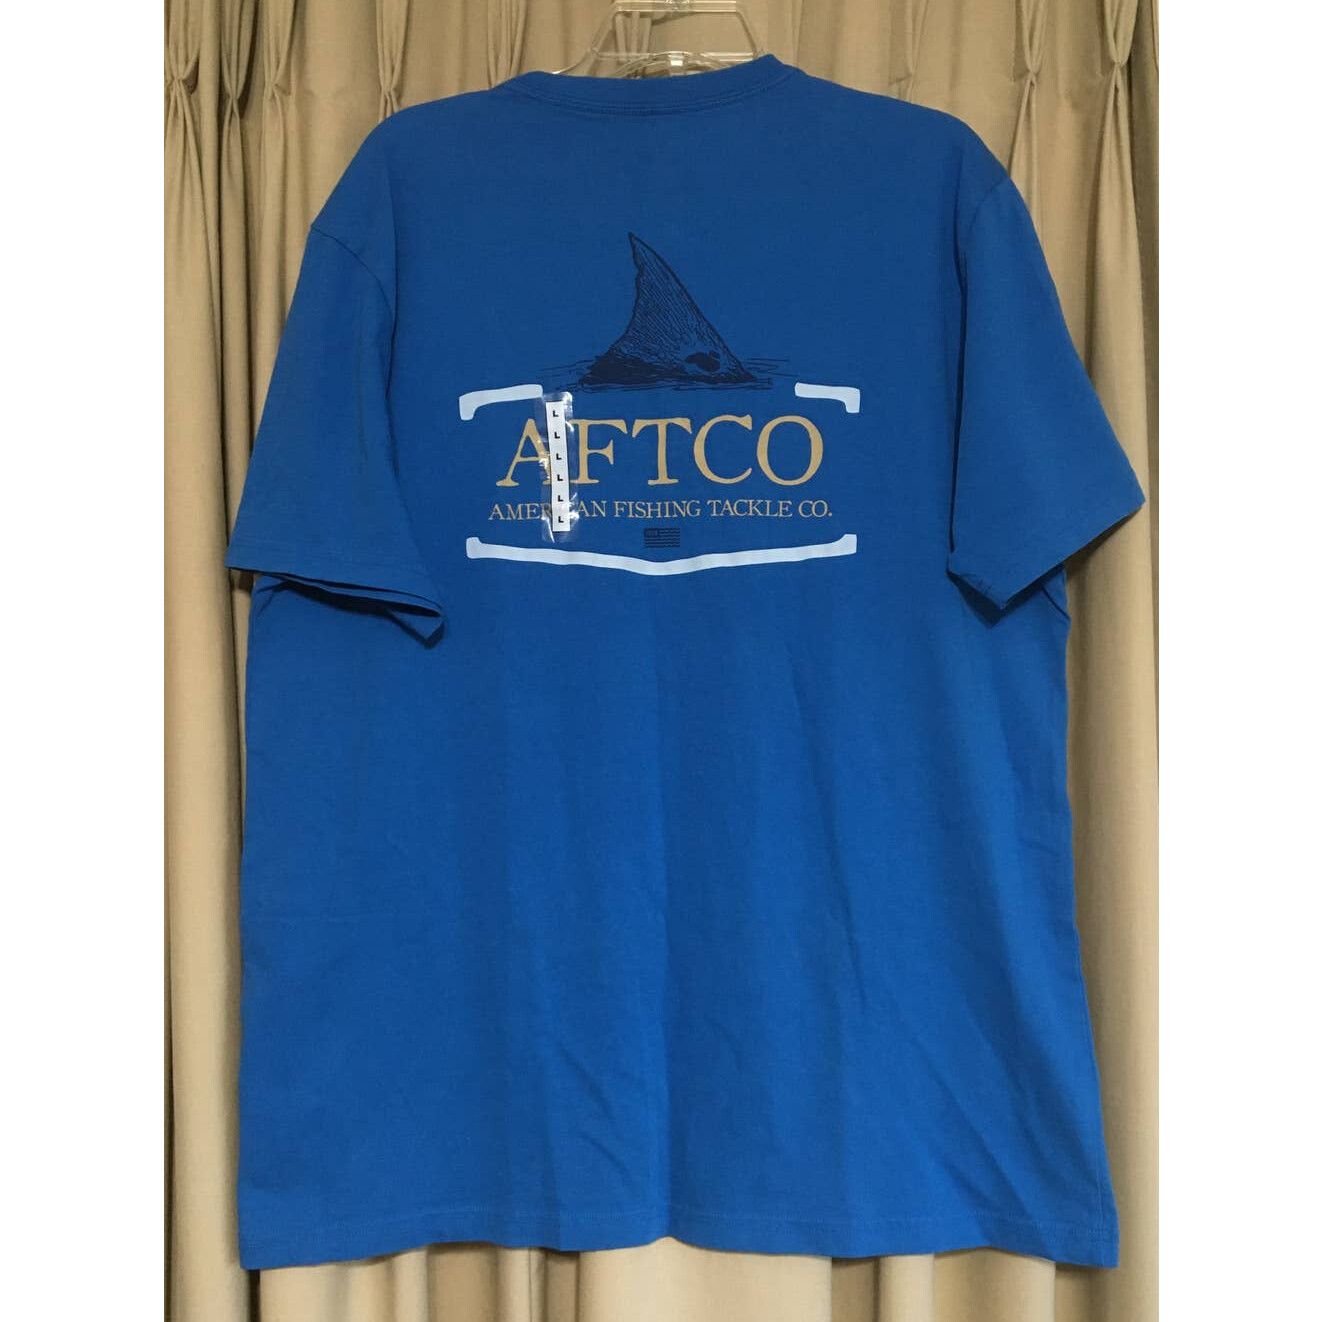 1 AFTCO American Fishing Tackle Company Large Blue SS T-shirt